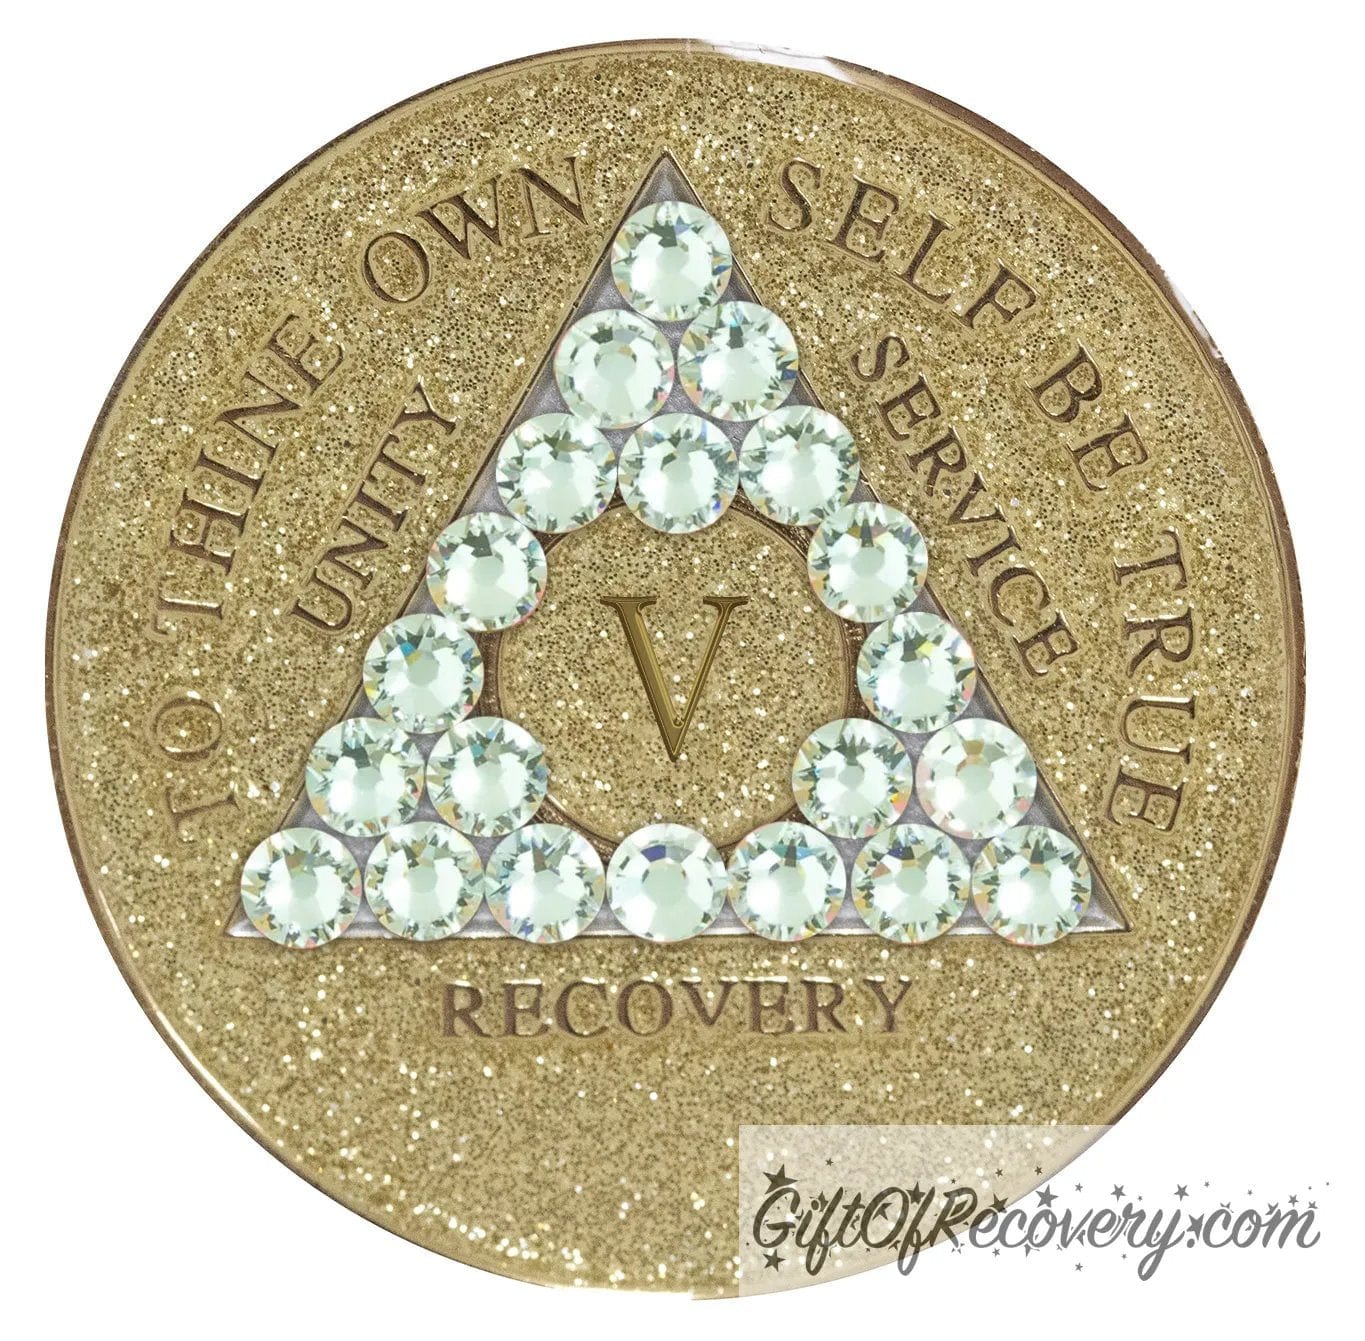 5 year AA medallion in gold glitter with twenty-one genuine diamond CZ crystals in the shape of a triangle, symbolizing transformation under pressure, to thine own self be true, unity, service, recovery and roman numeral are embossed with 14k gold-plated brass along with outer rim, sealed in a chip and scratch-resistant resin giving it a beautiful glossy look.